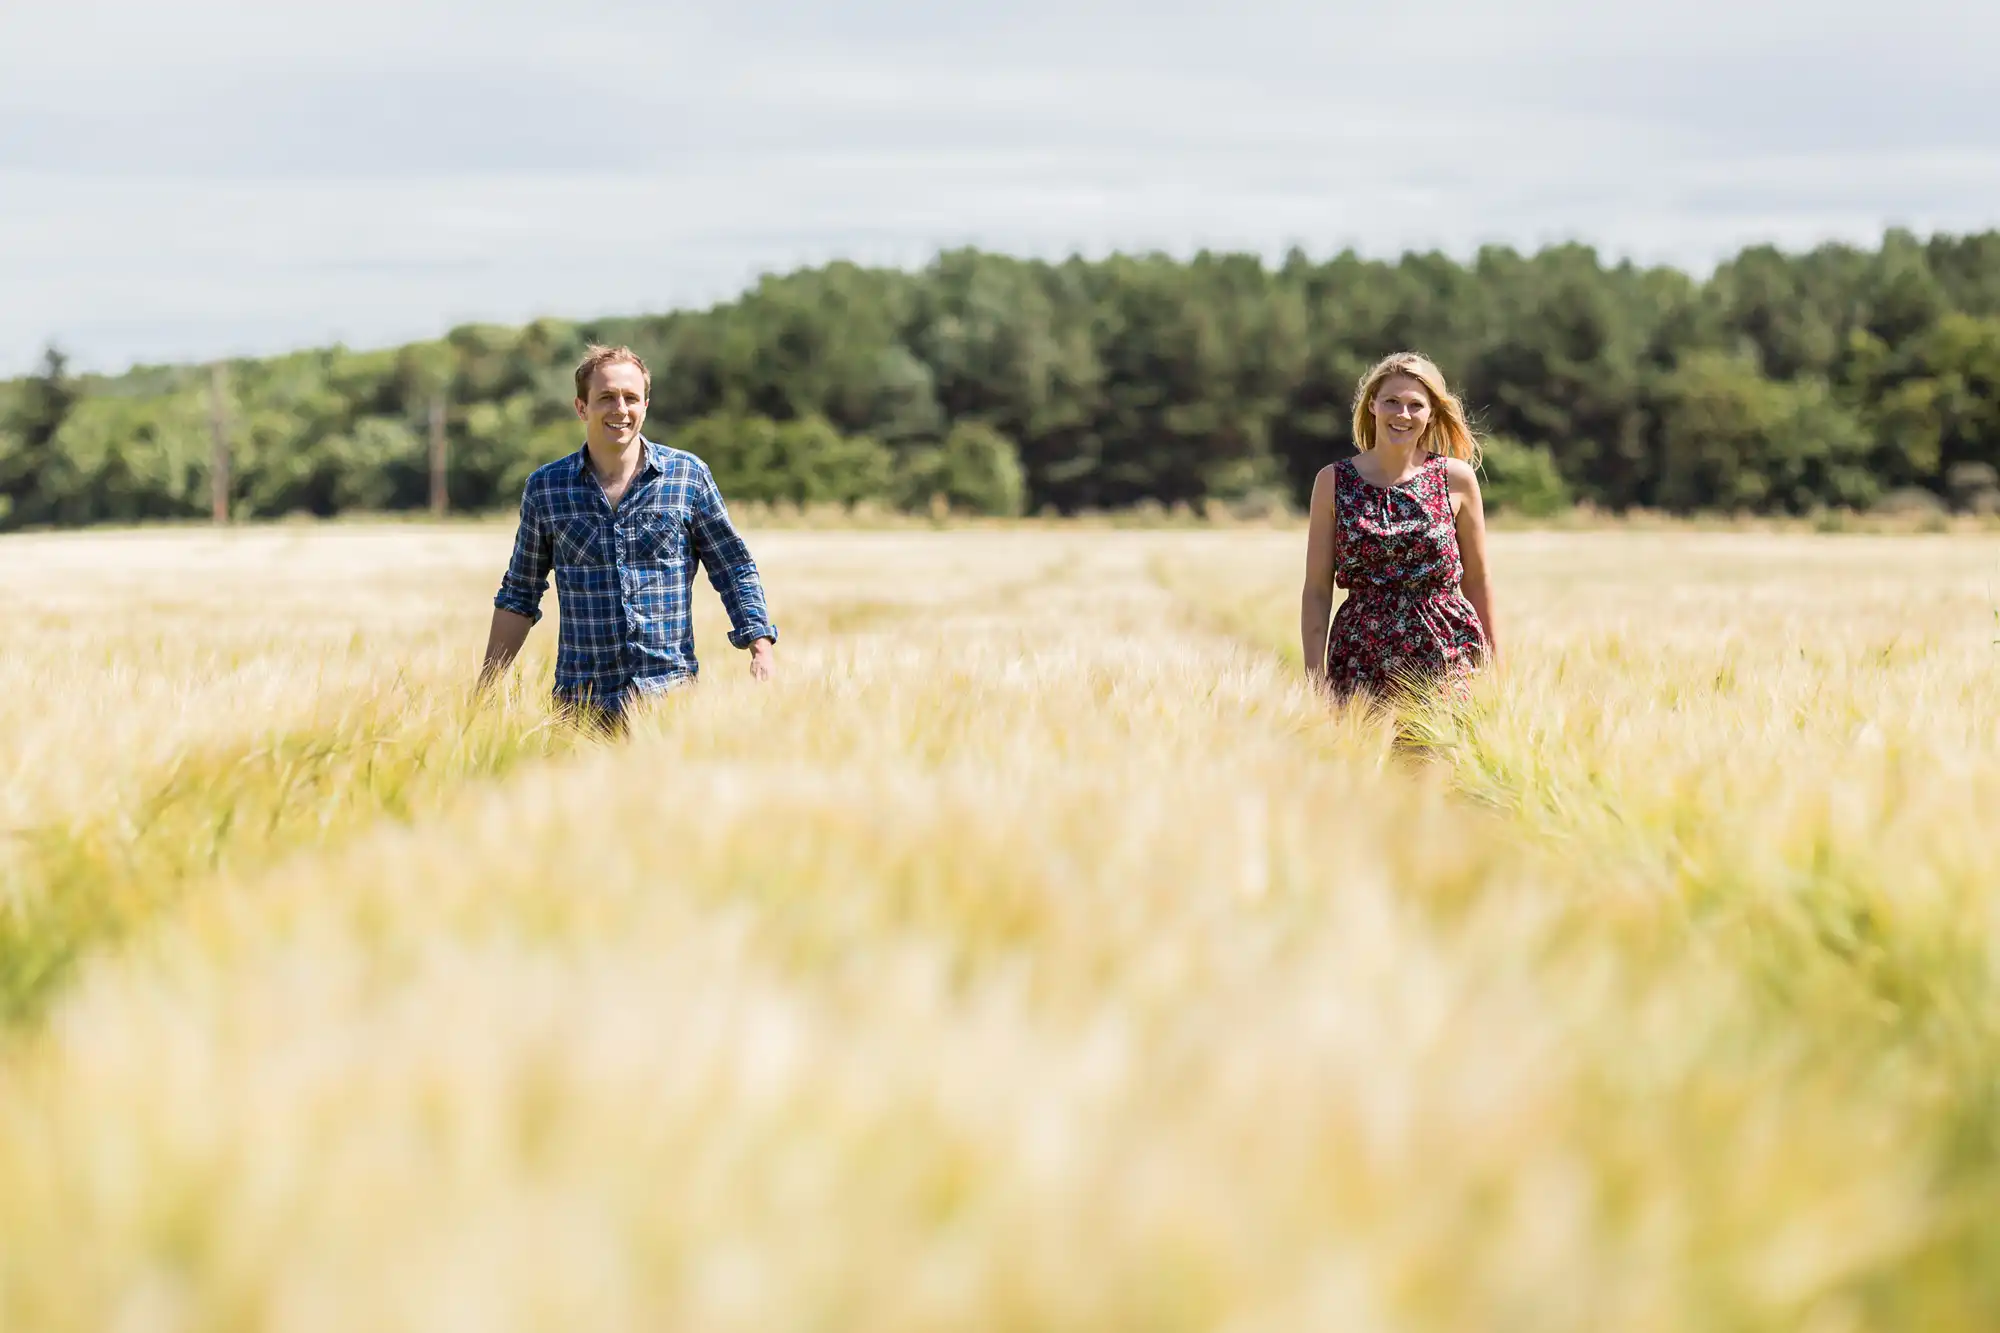 Two people, a man and a woman, happily walking through a golden wheat field on a sunny day, facing towards the camera.